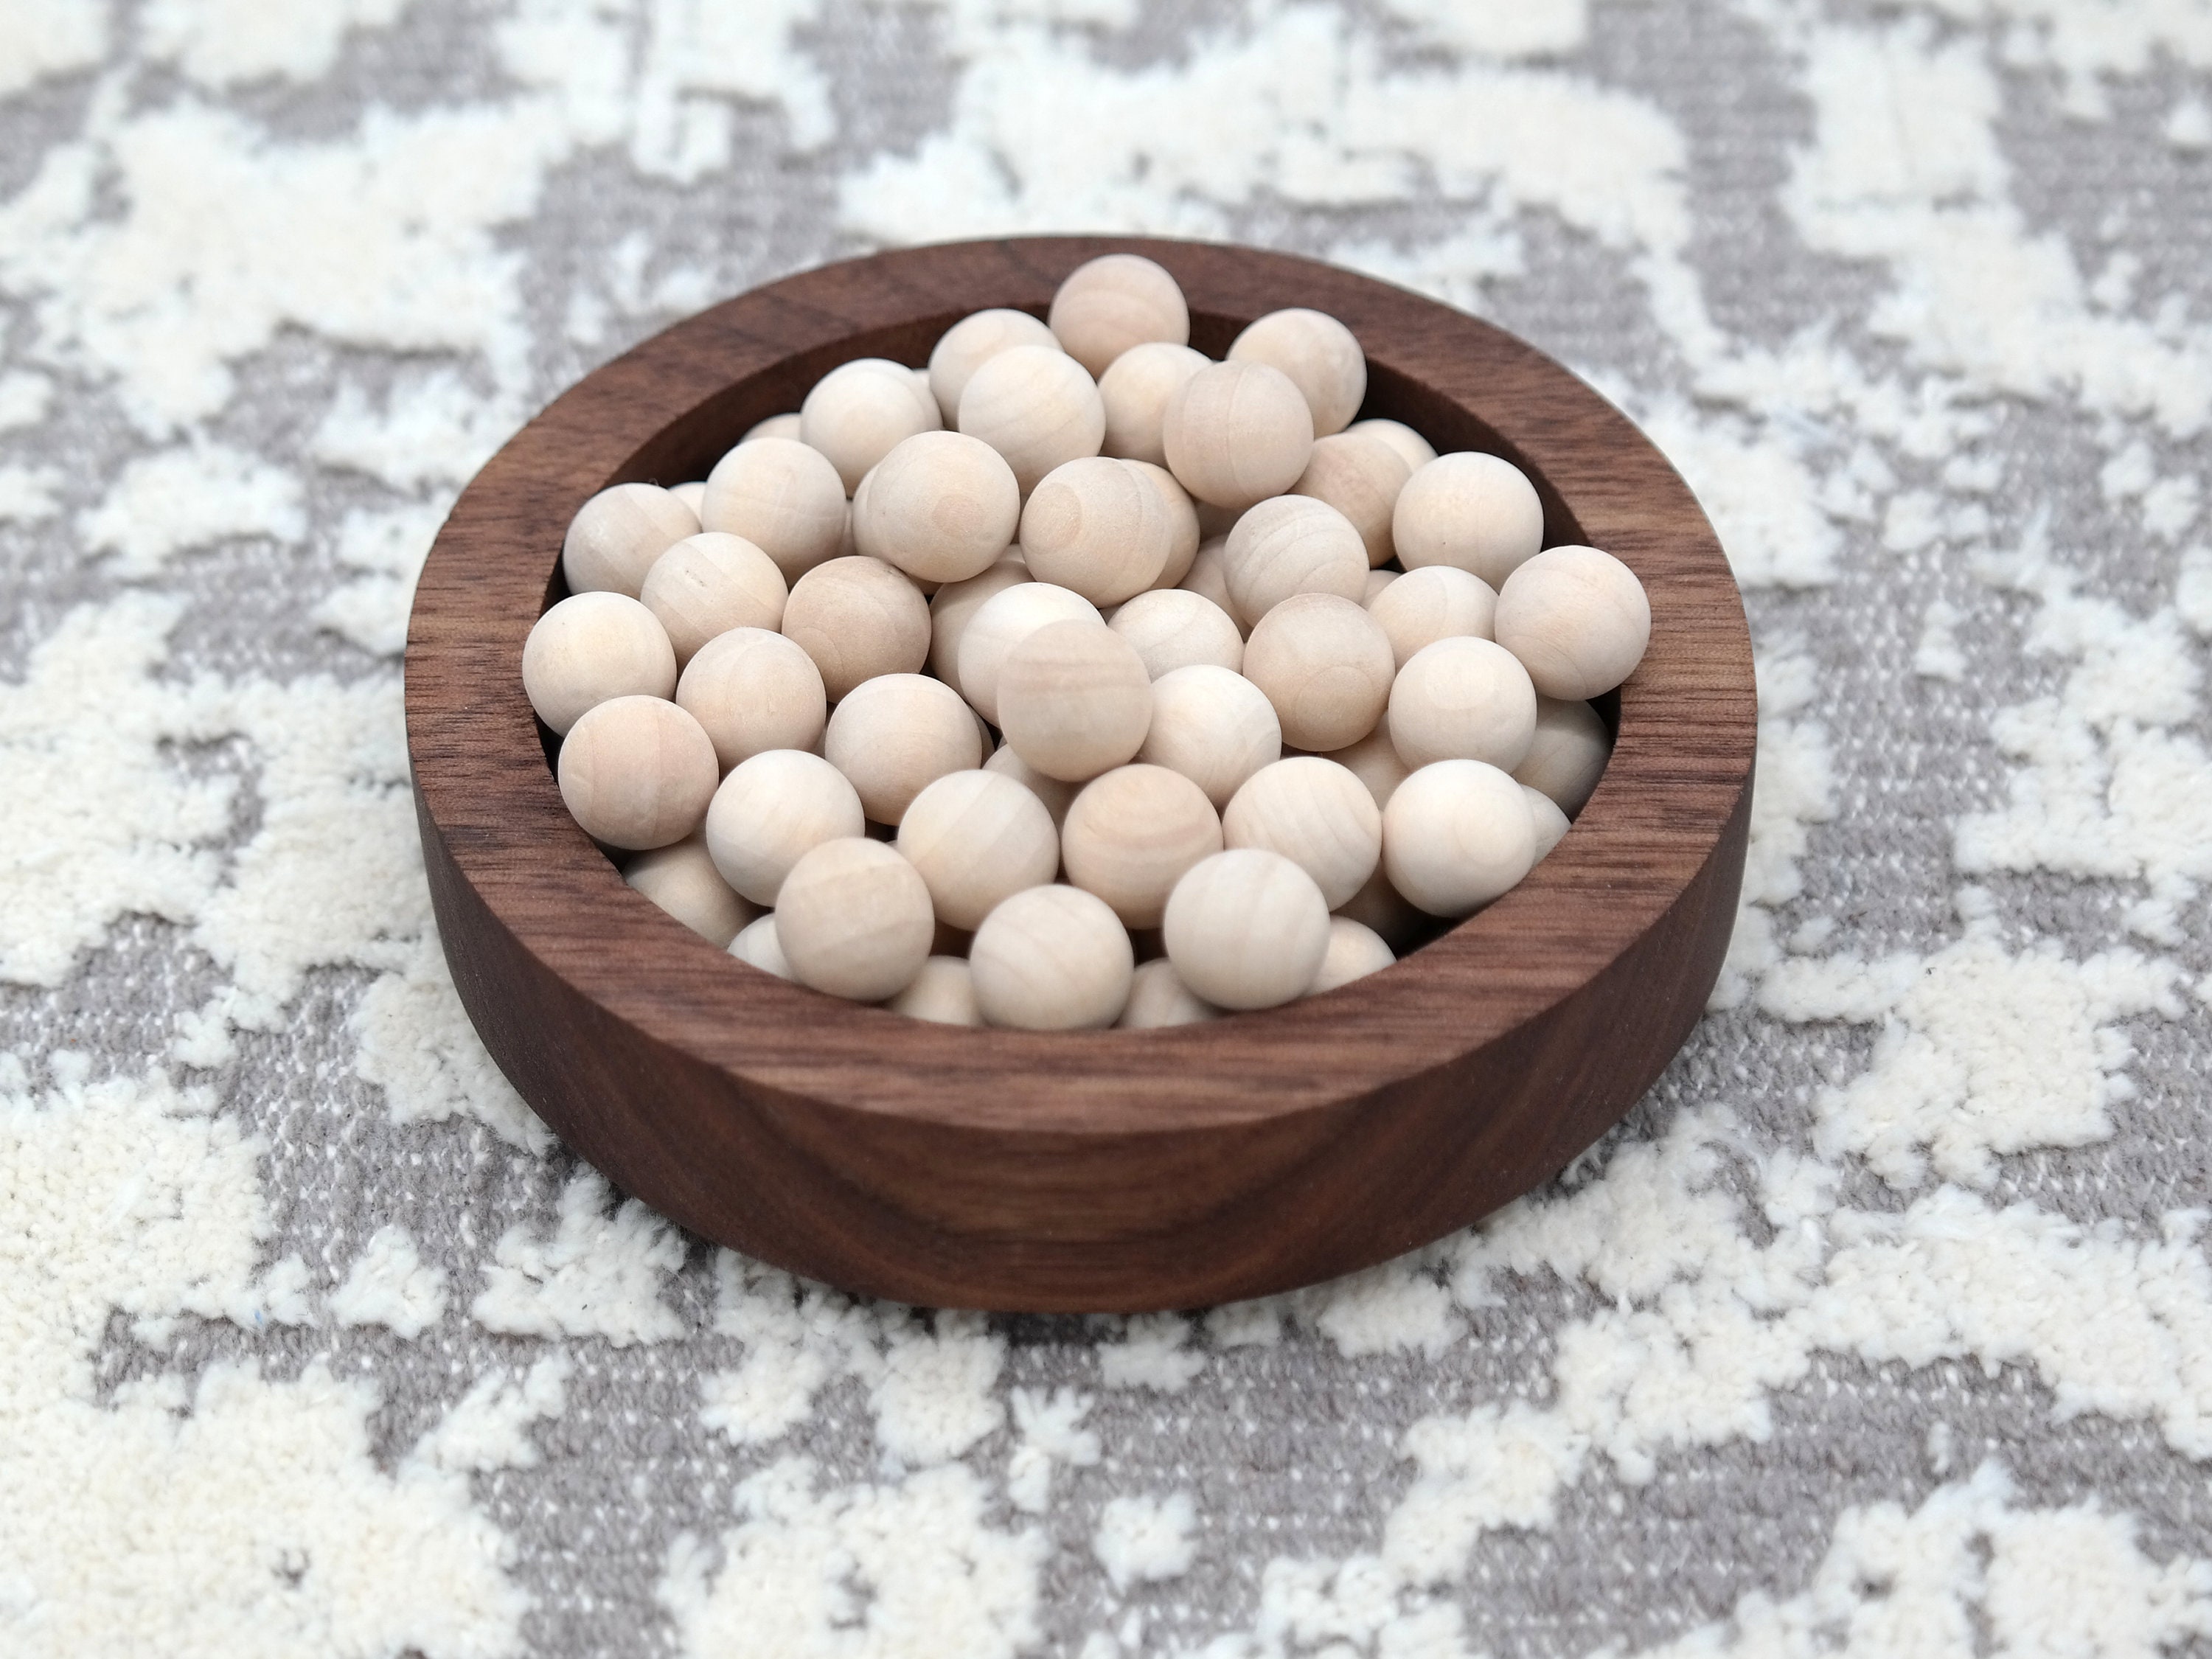 400pcs Small Half Wooden Beads for Crafts - Wooden Balls for Crafts